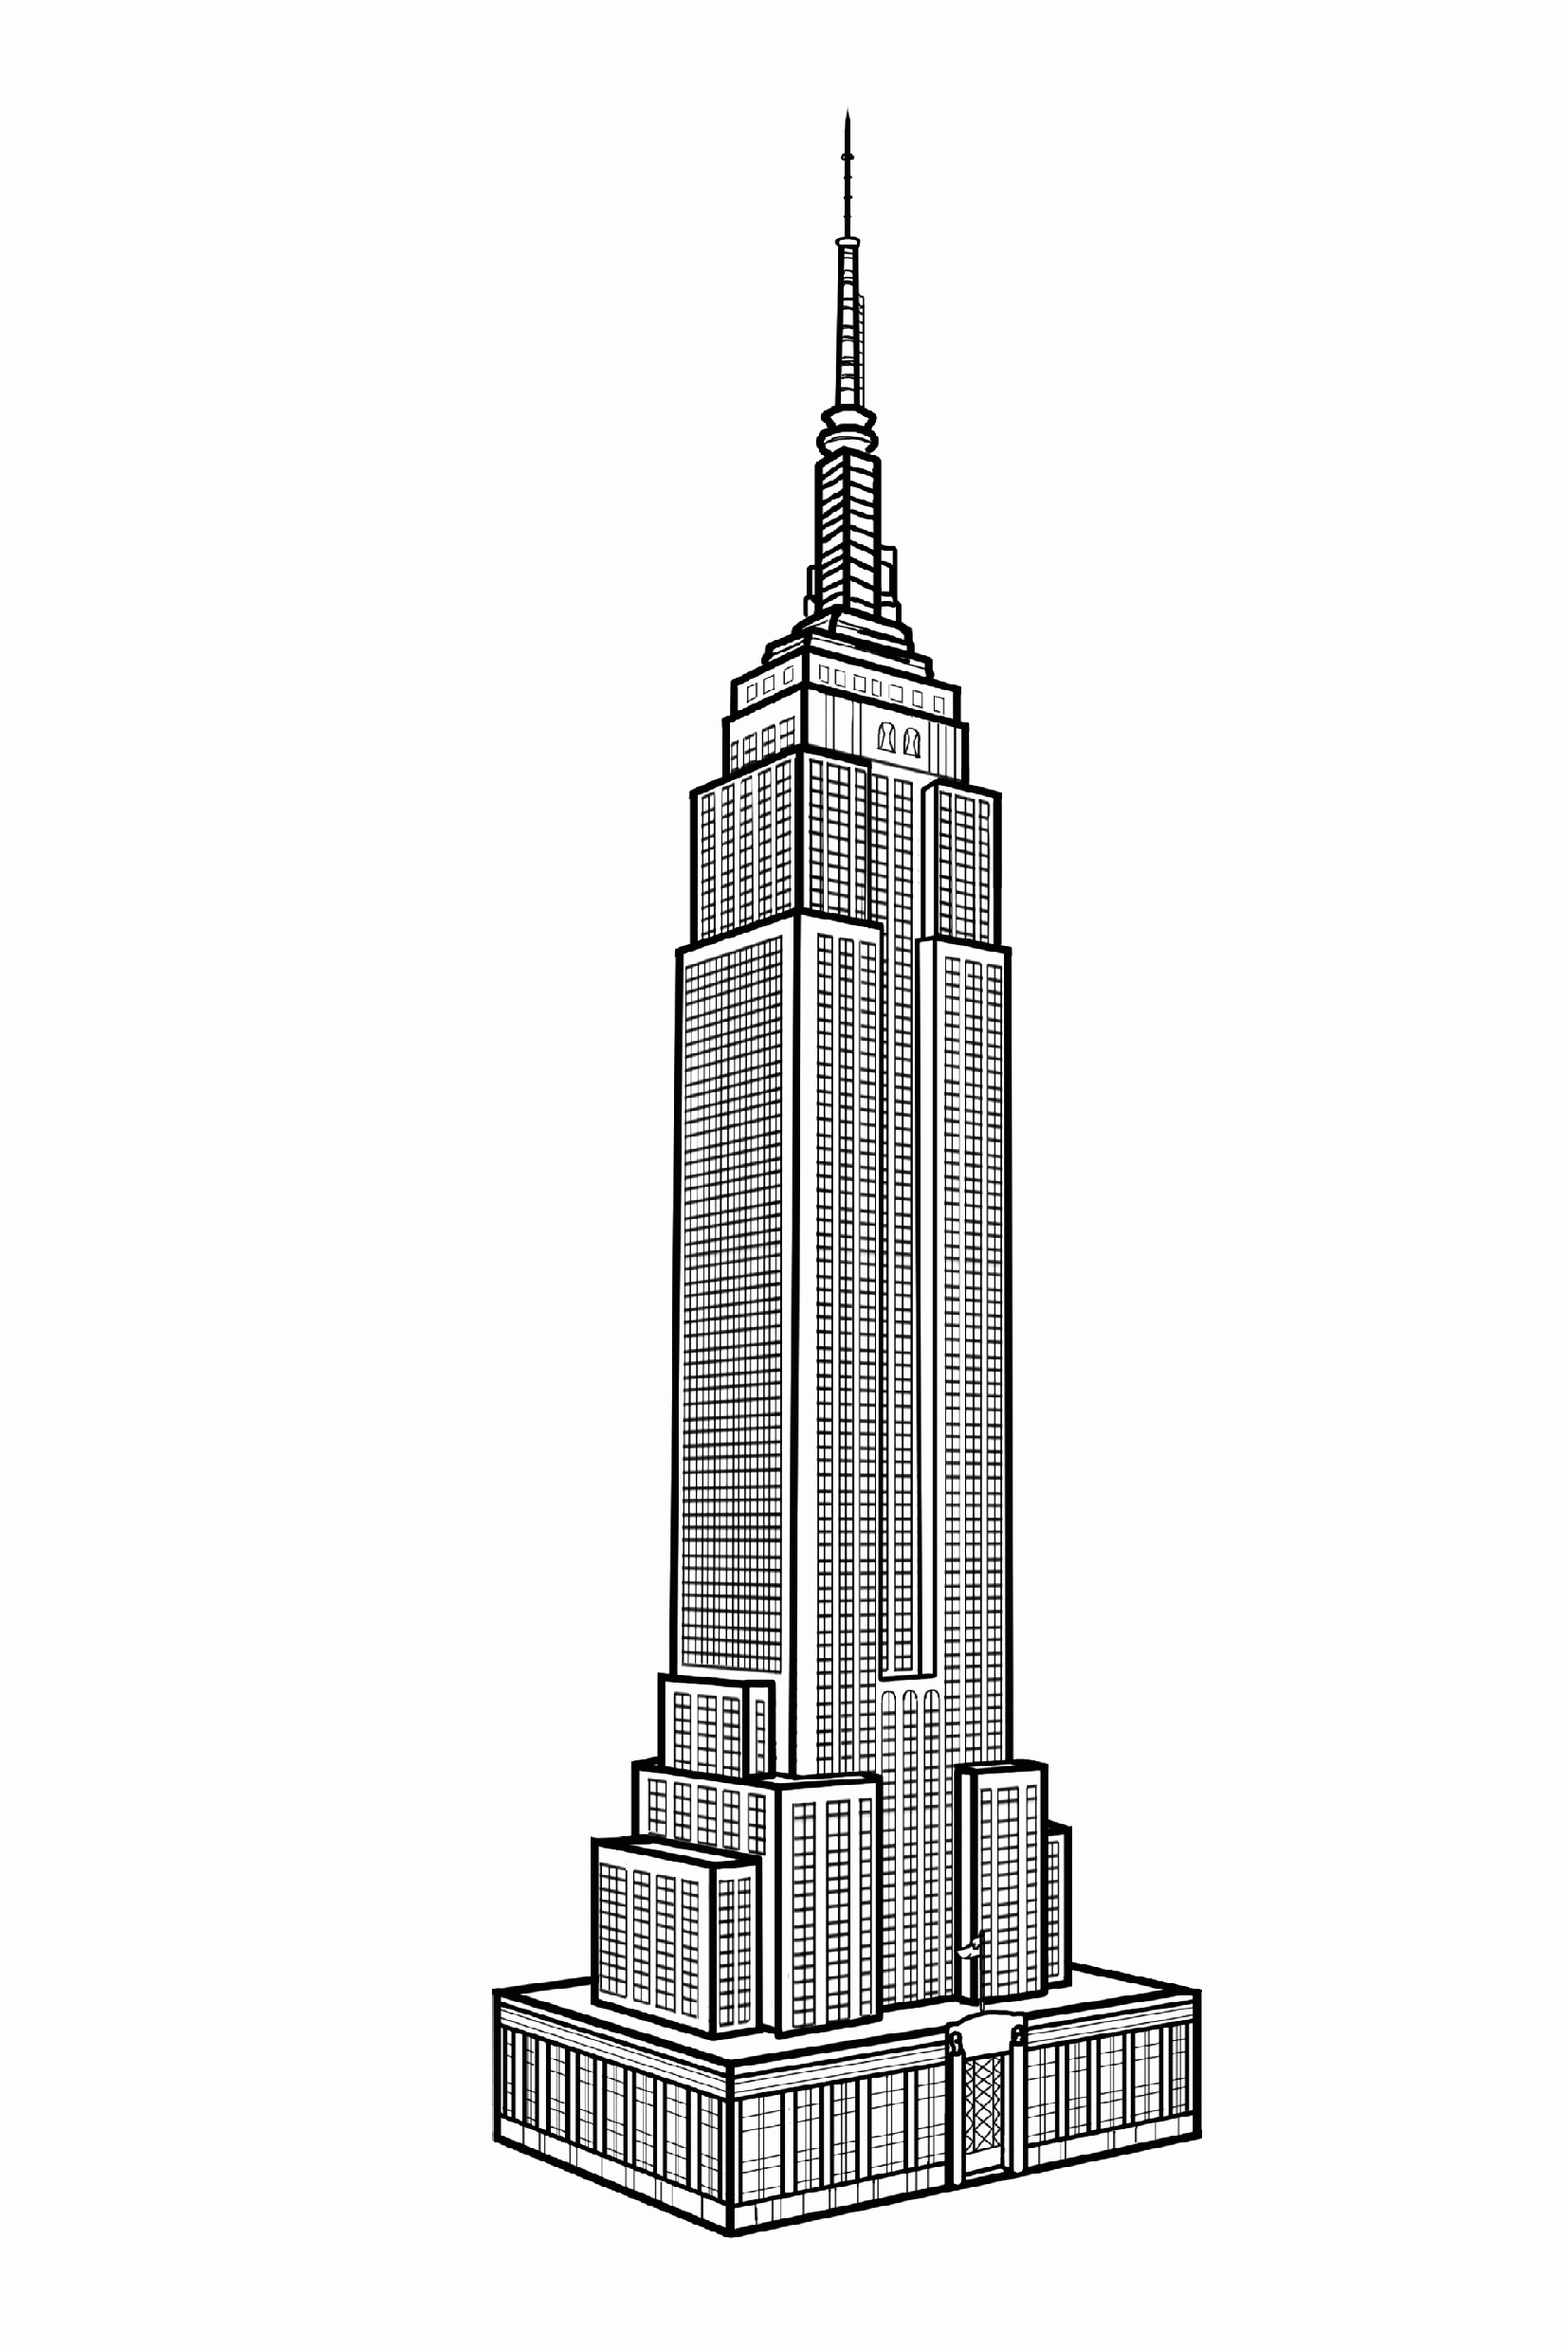 Coloring page for adult of the Empire State Building : hundreds of windows ... choose your own style : realistic, pop art, psychedelic ..